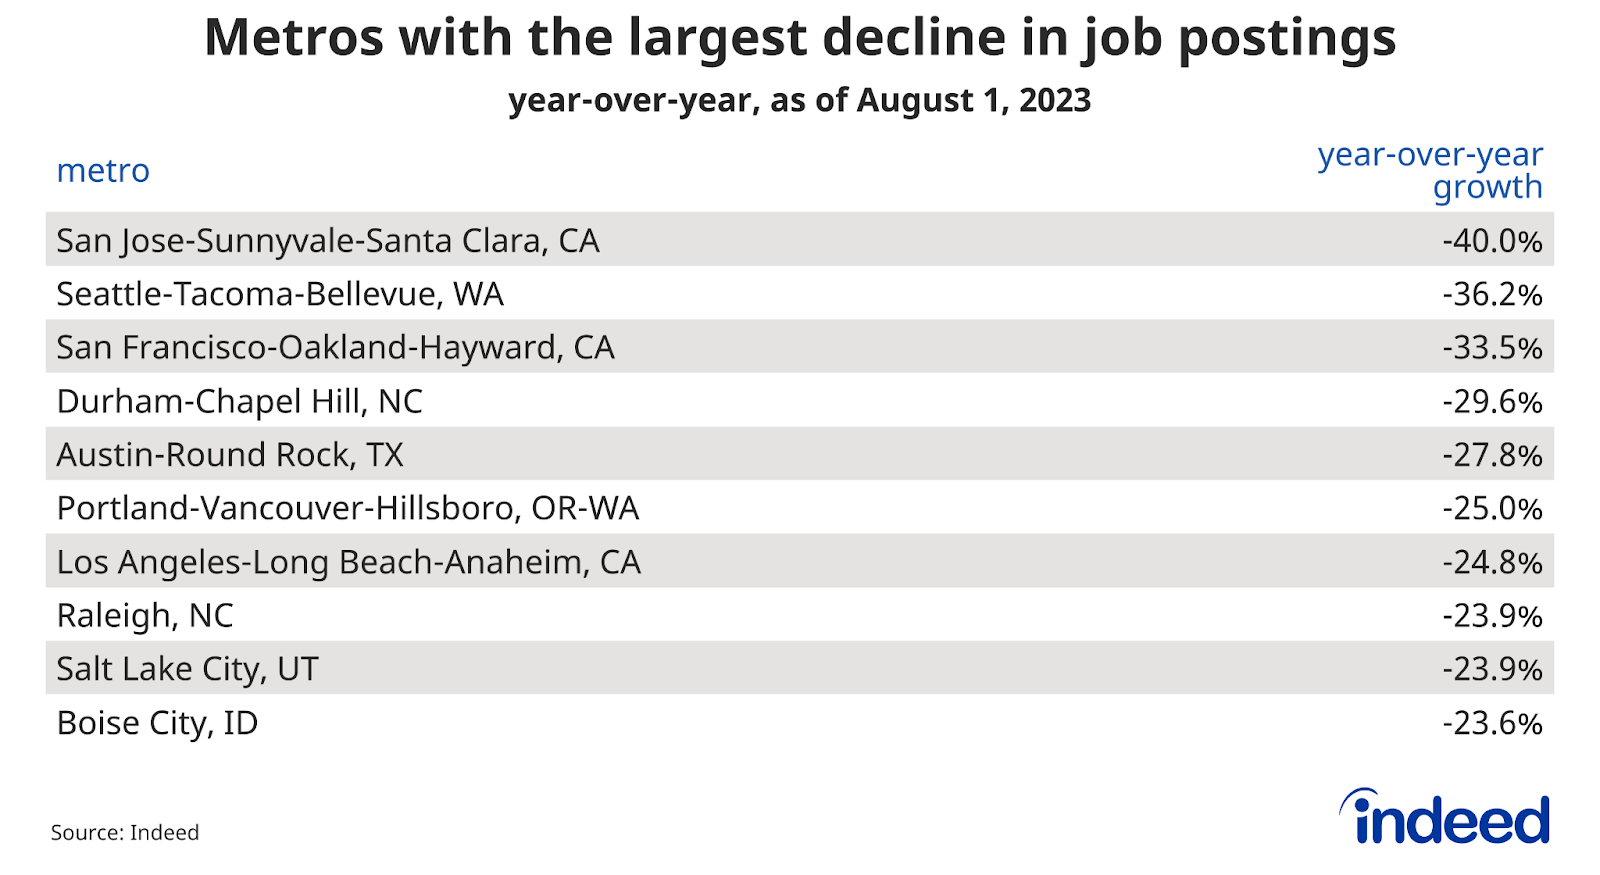 Chart titled “Metros with the largest decline in job postings” with columns named “ metro,” and “year-over-year growth.” Indeed tracked the change in postings by metro, finding that among metros with more than half a million residents, San Jose-Sunnyvale-Santa Clara, CA had the largest year-over-year decline, along with several other metros with a large share of jobs that can be done remotely.